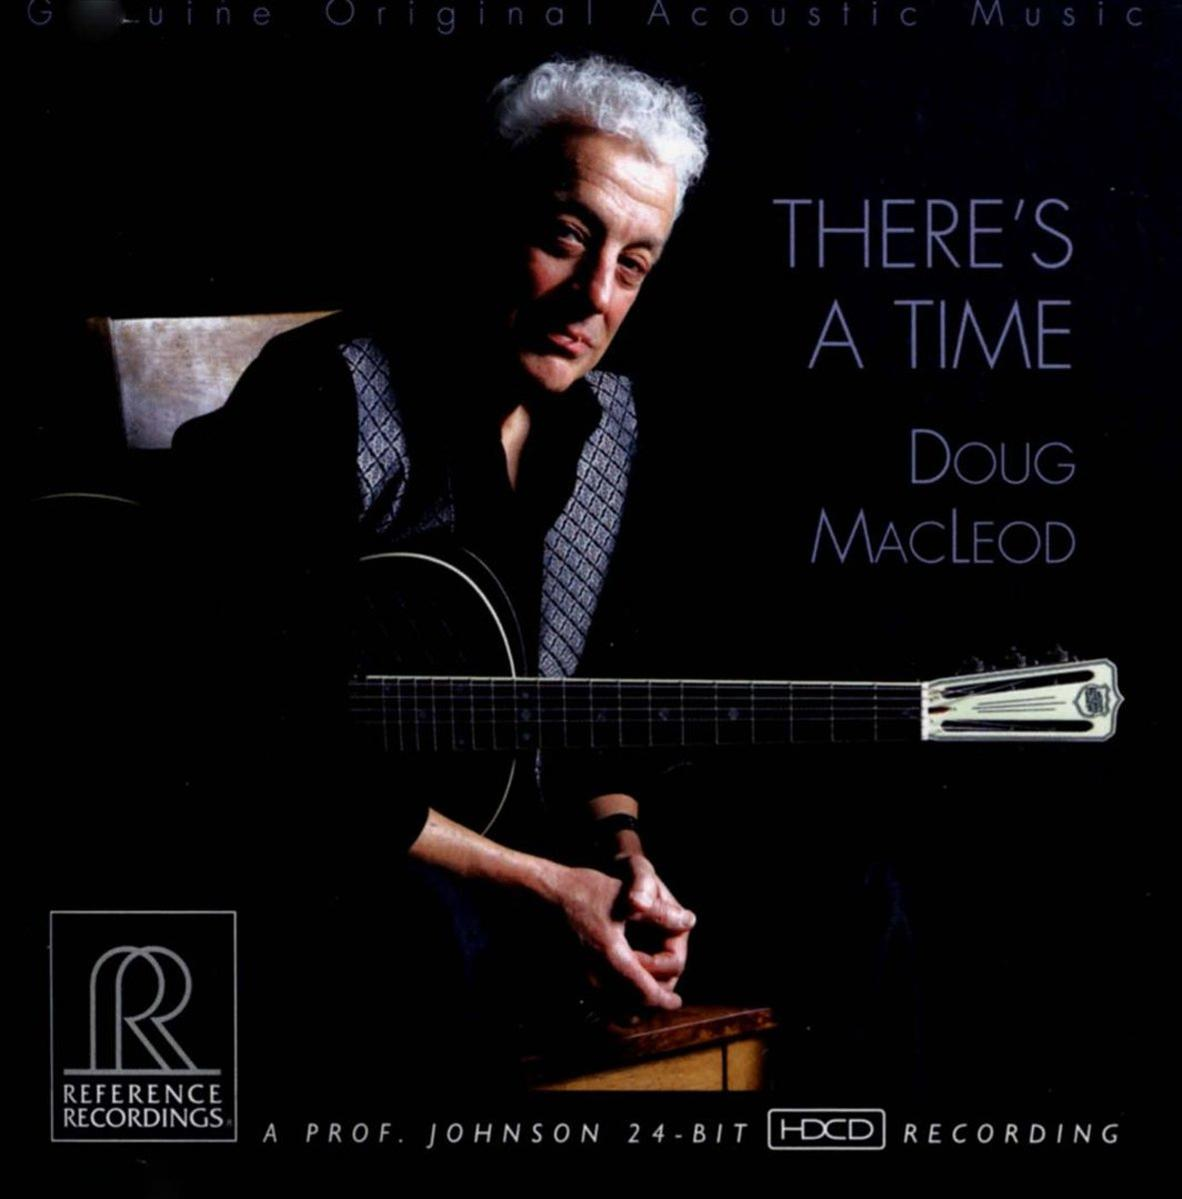 - Macleod (Vinyl) Time Doug - A There\'s